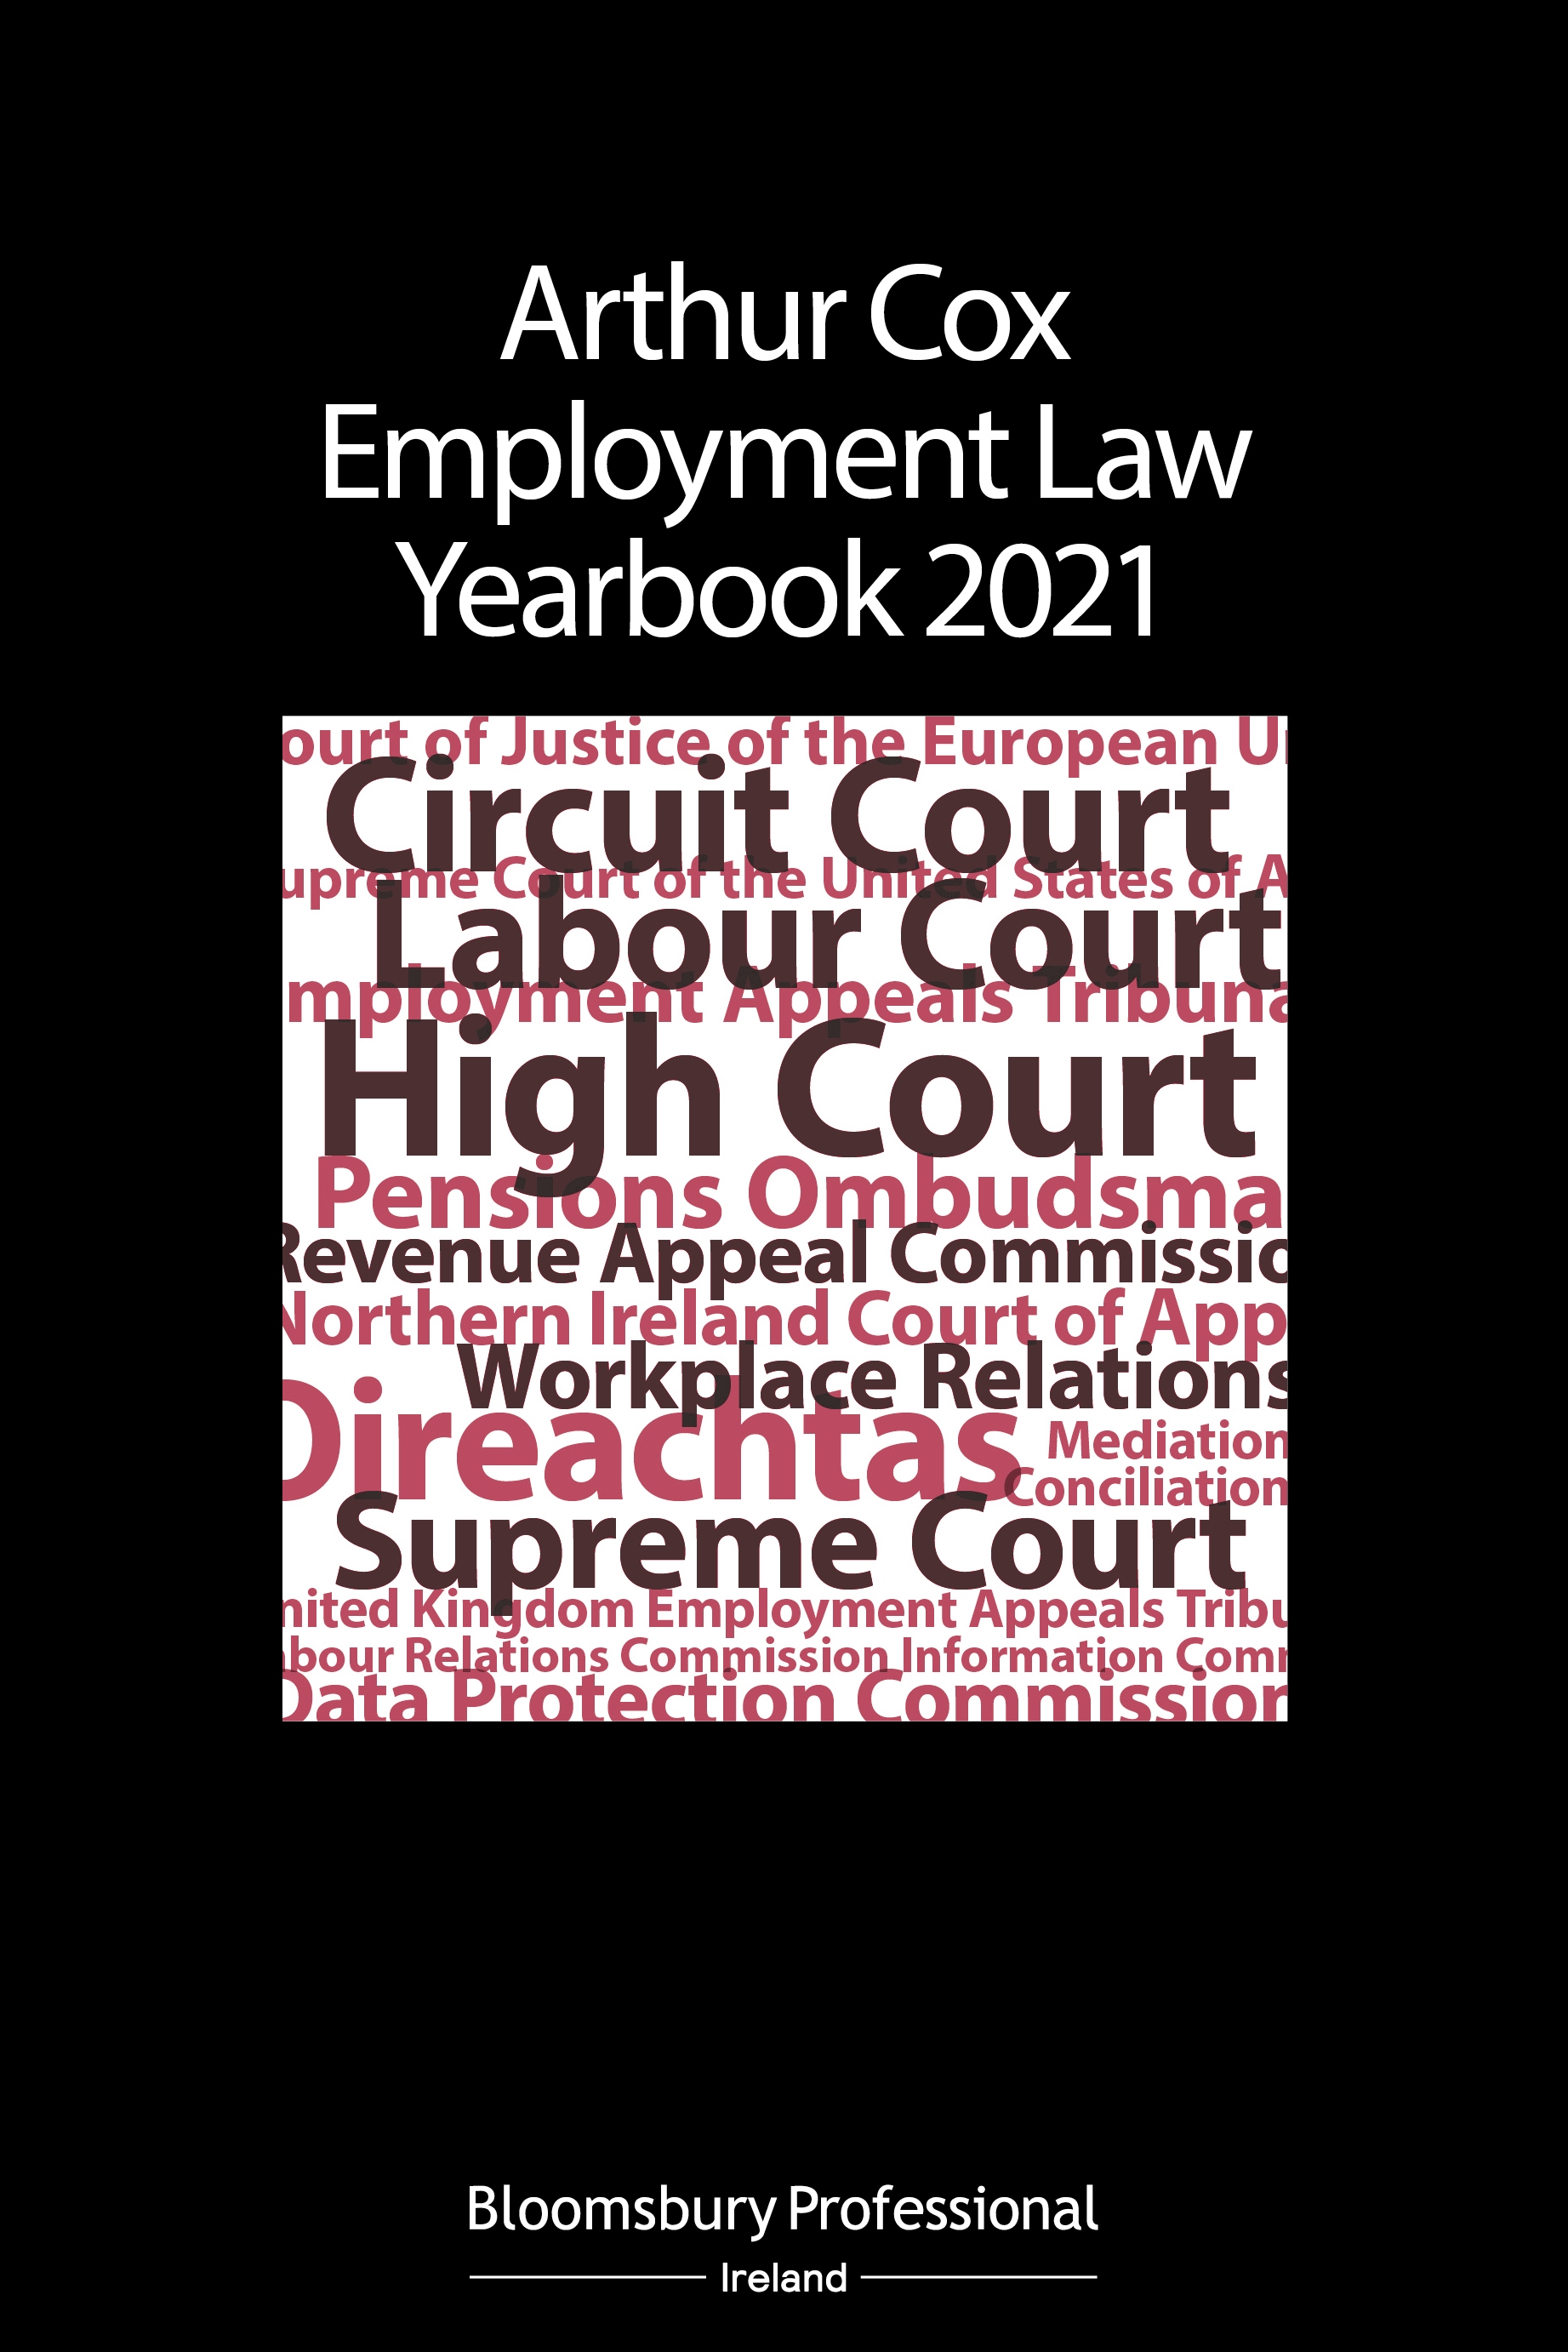 Arthur Cox Employment Law Yearbook 2021 book jacket